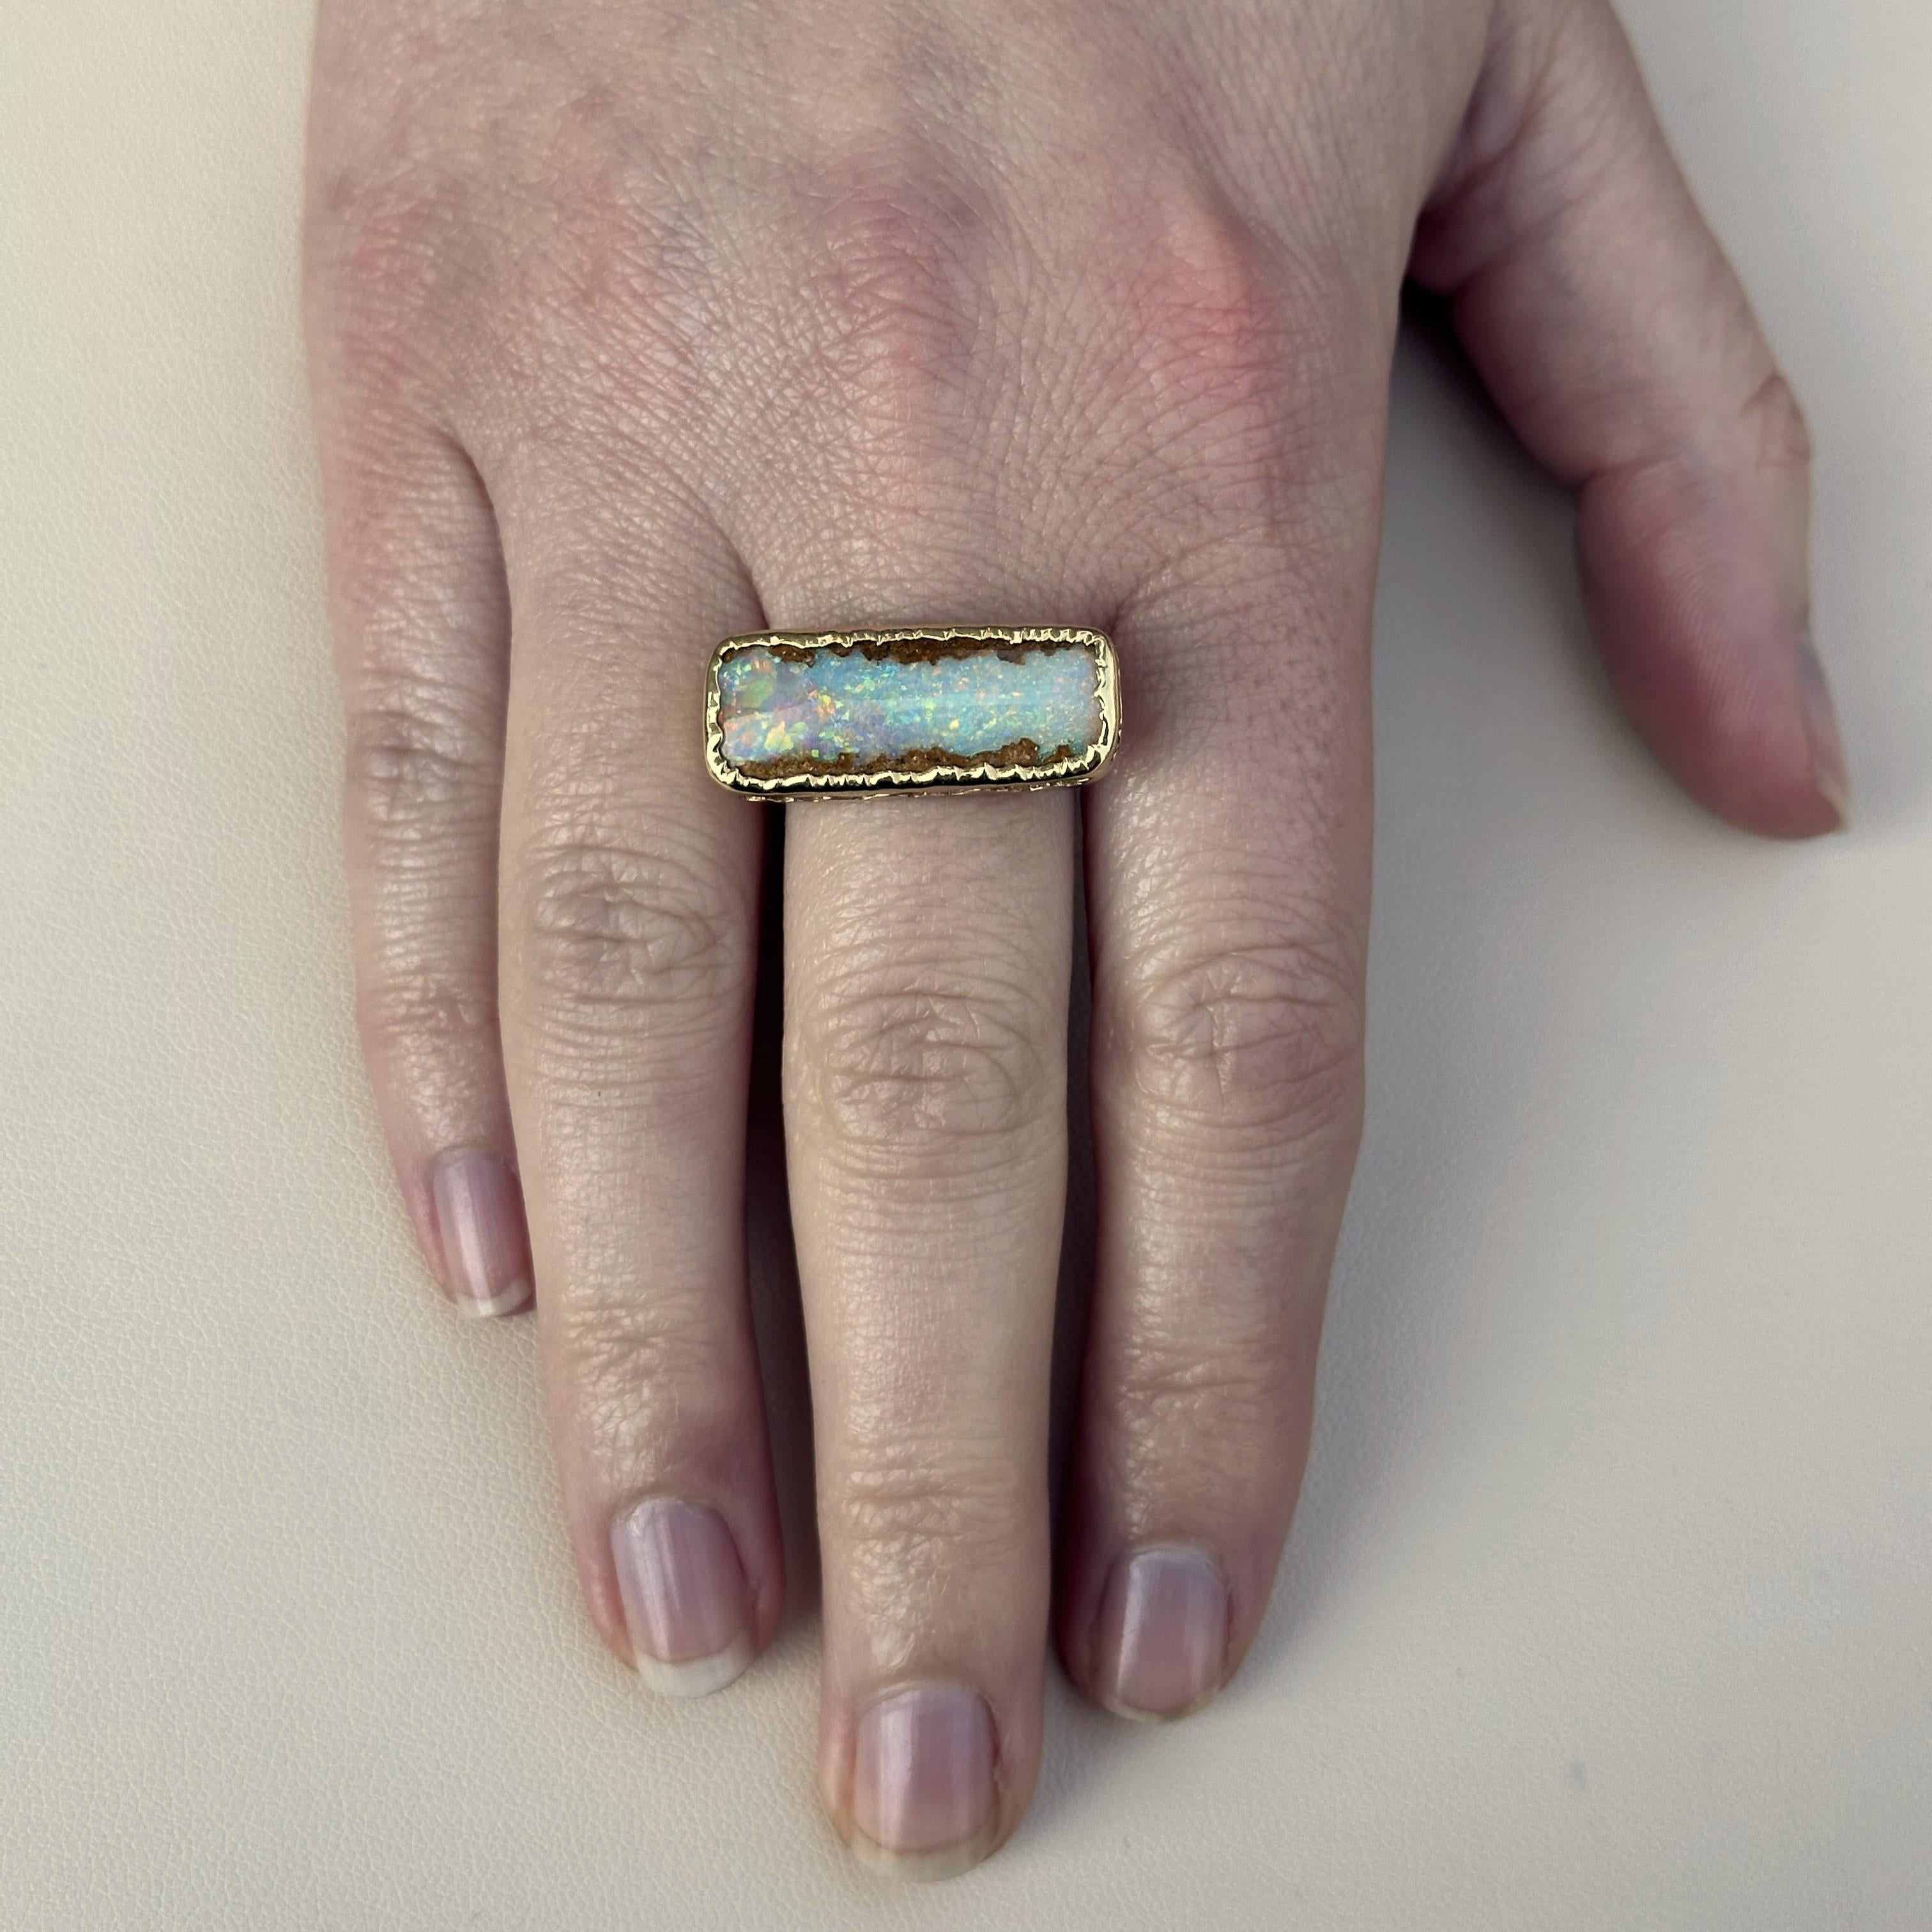 An 18k Yellow Gold ring with a bezel set 8 carat pipe-variety boulder opal. This ring was designed and made by llyn strong.